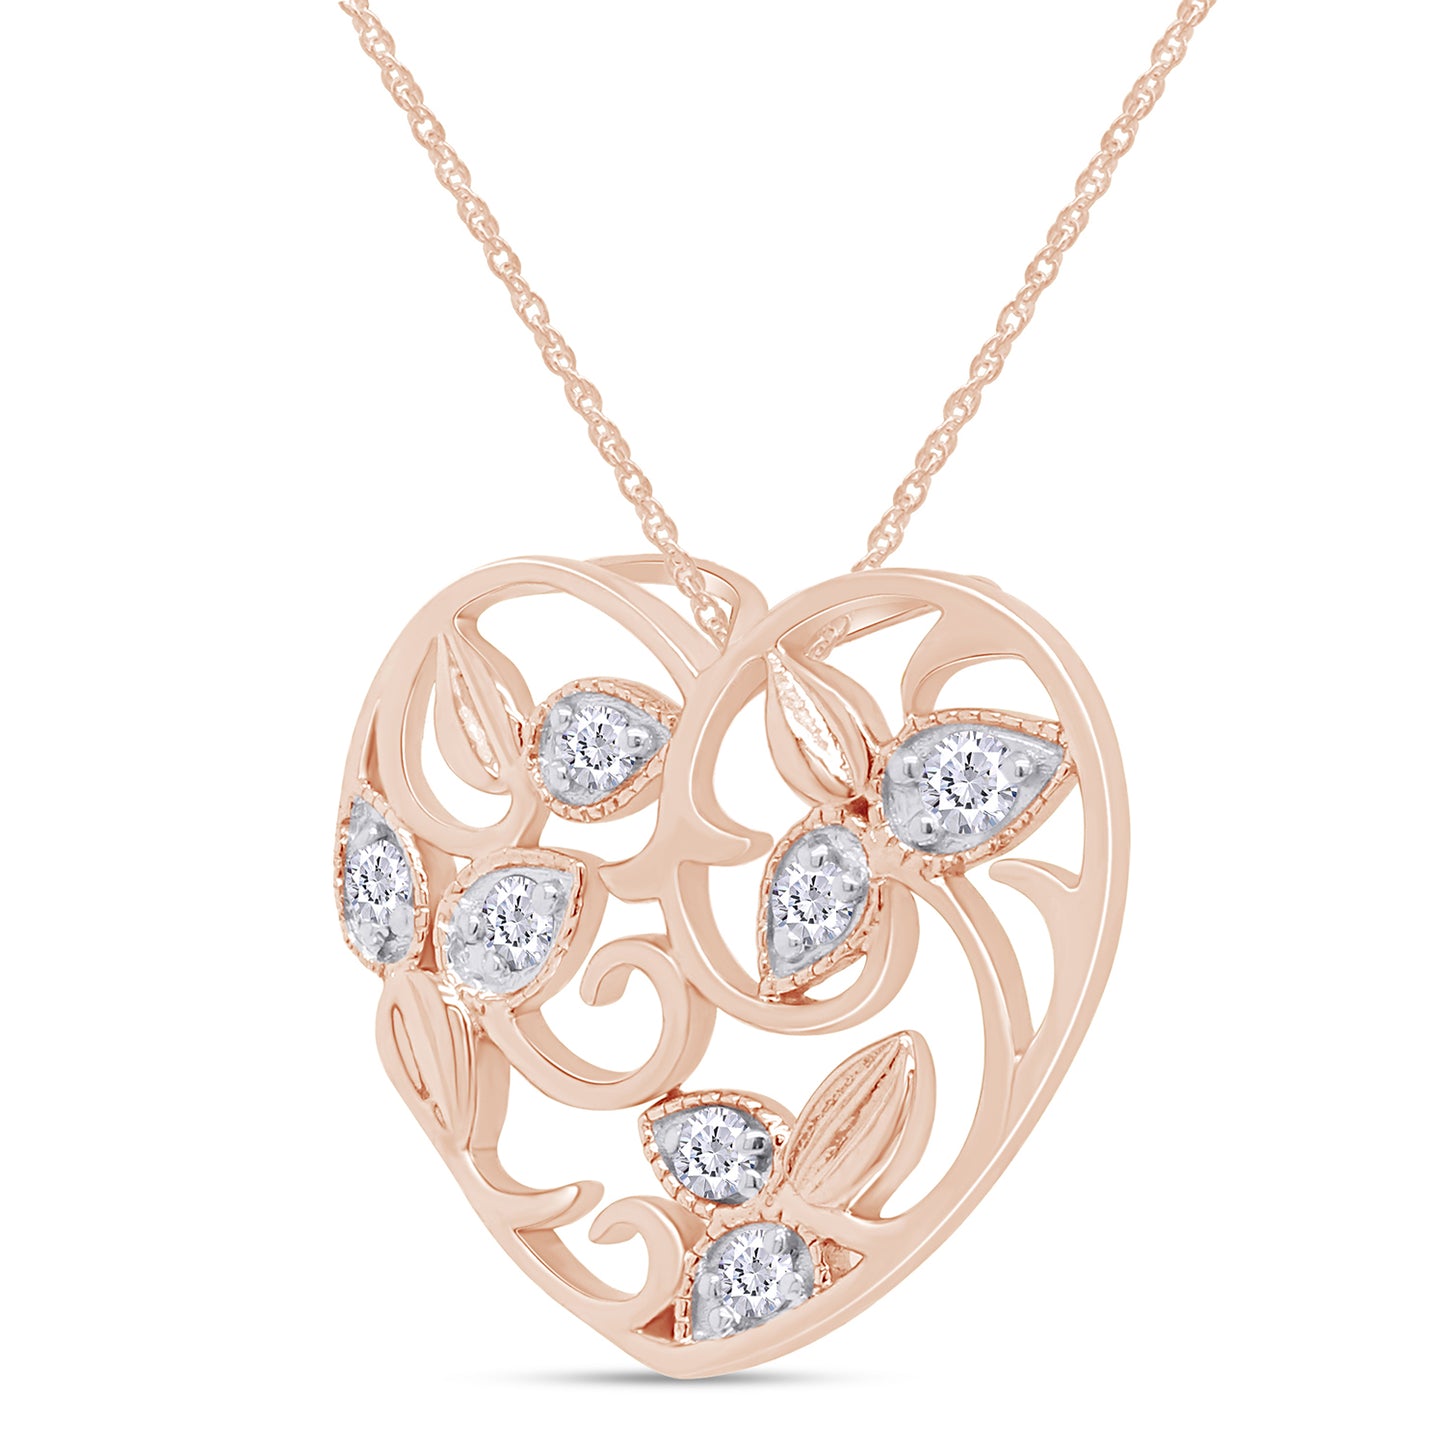 Load image into Gallery viewer, 1/5 Carat Round White Natural Diamond Filigree Vintage-Style Heart Pendant Necklace In 925 Sterling Silver
